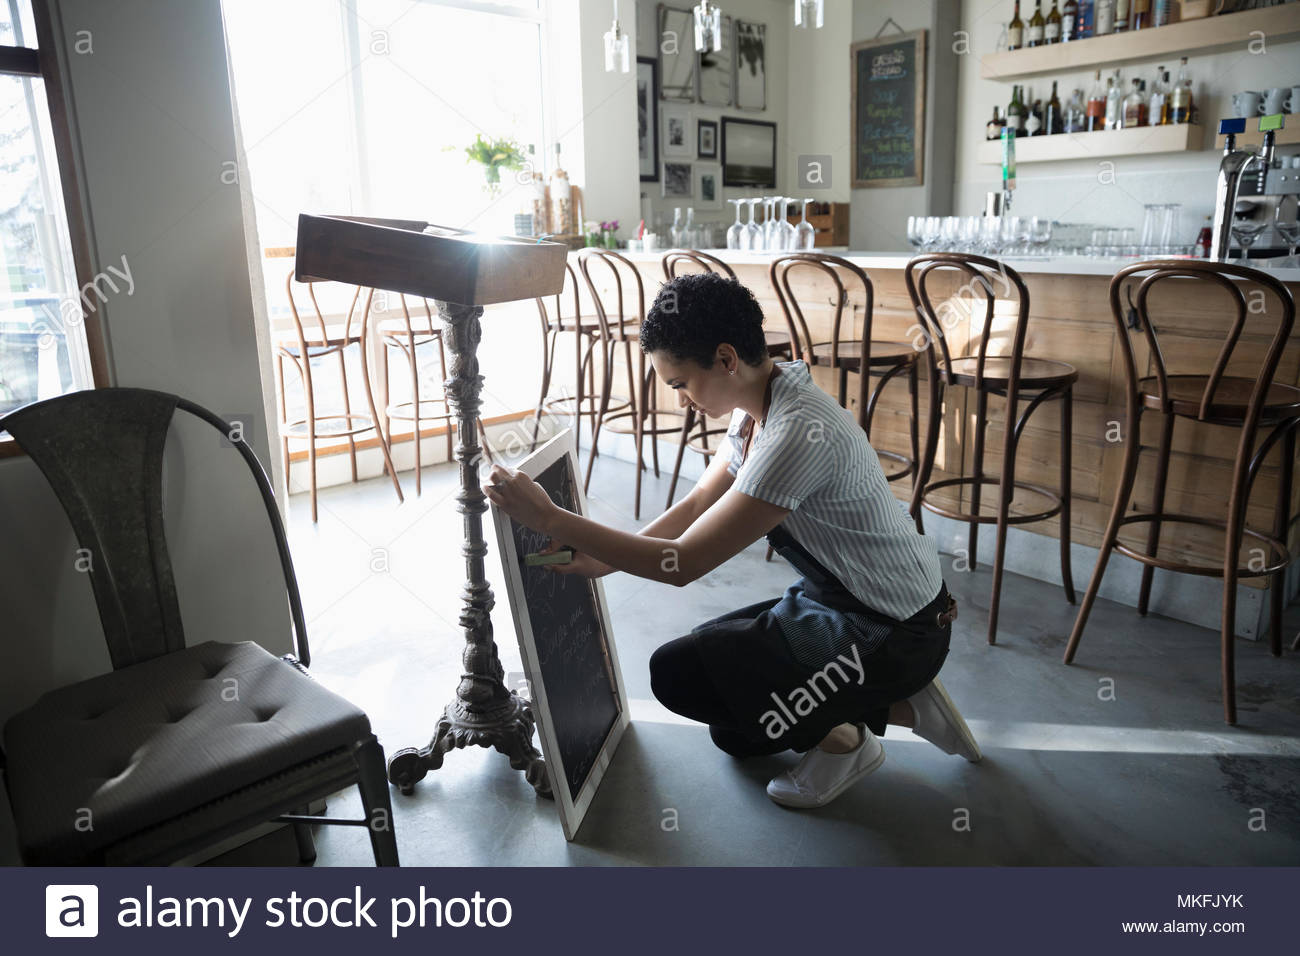 Young woman small business owner preparing menu on cafe blackboard Stock Photo